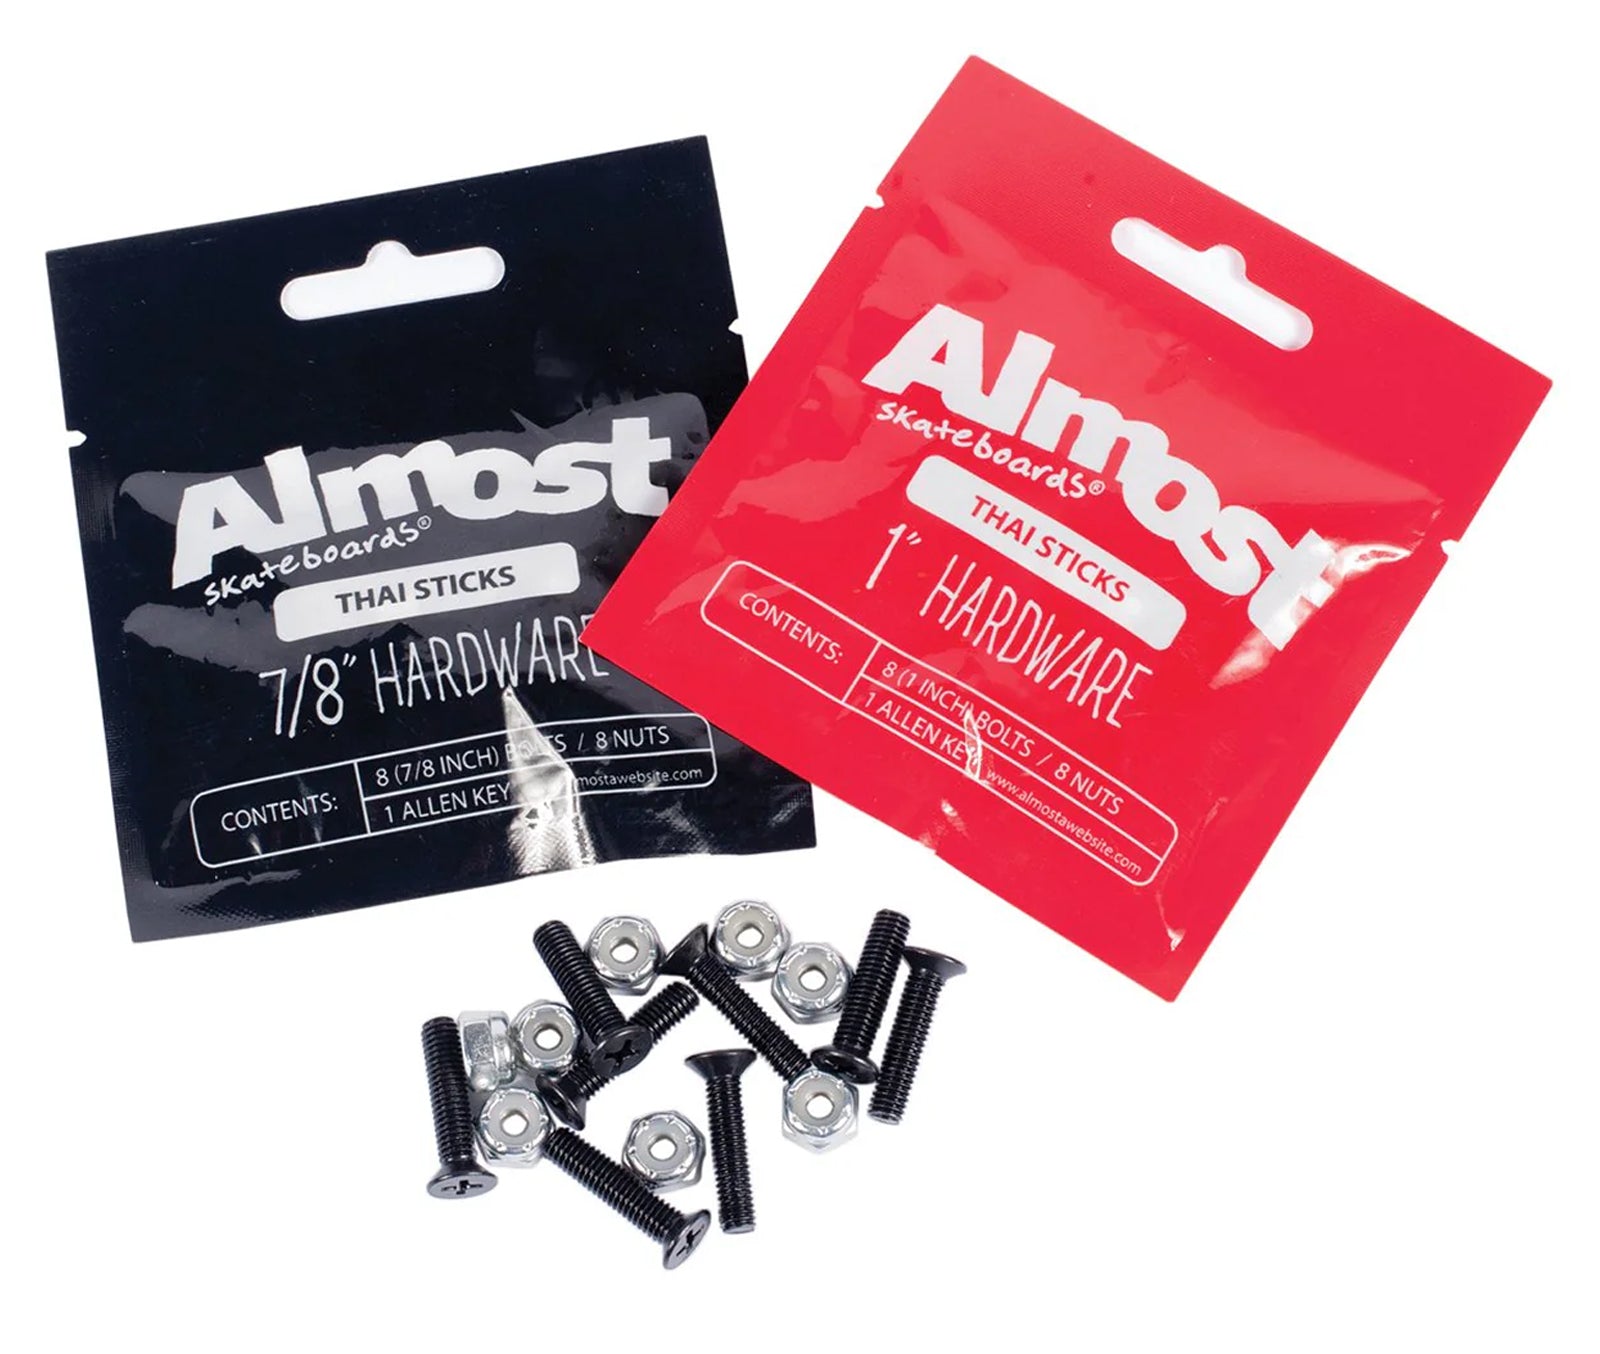 Almost Thai Stick Hardware 12 Pack Skateboard Bolts